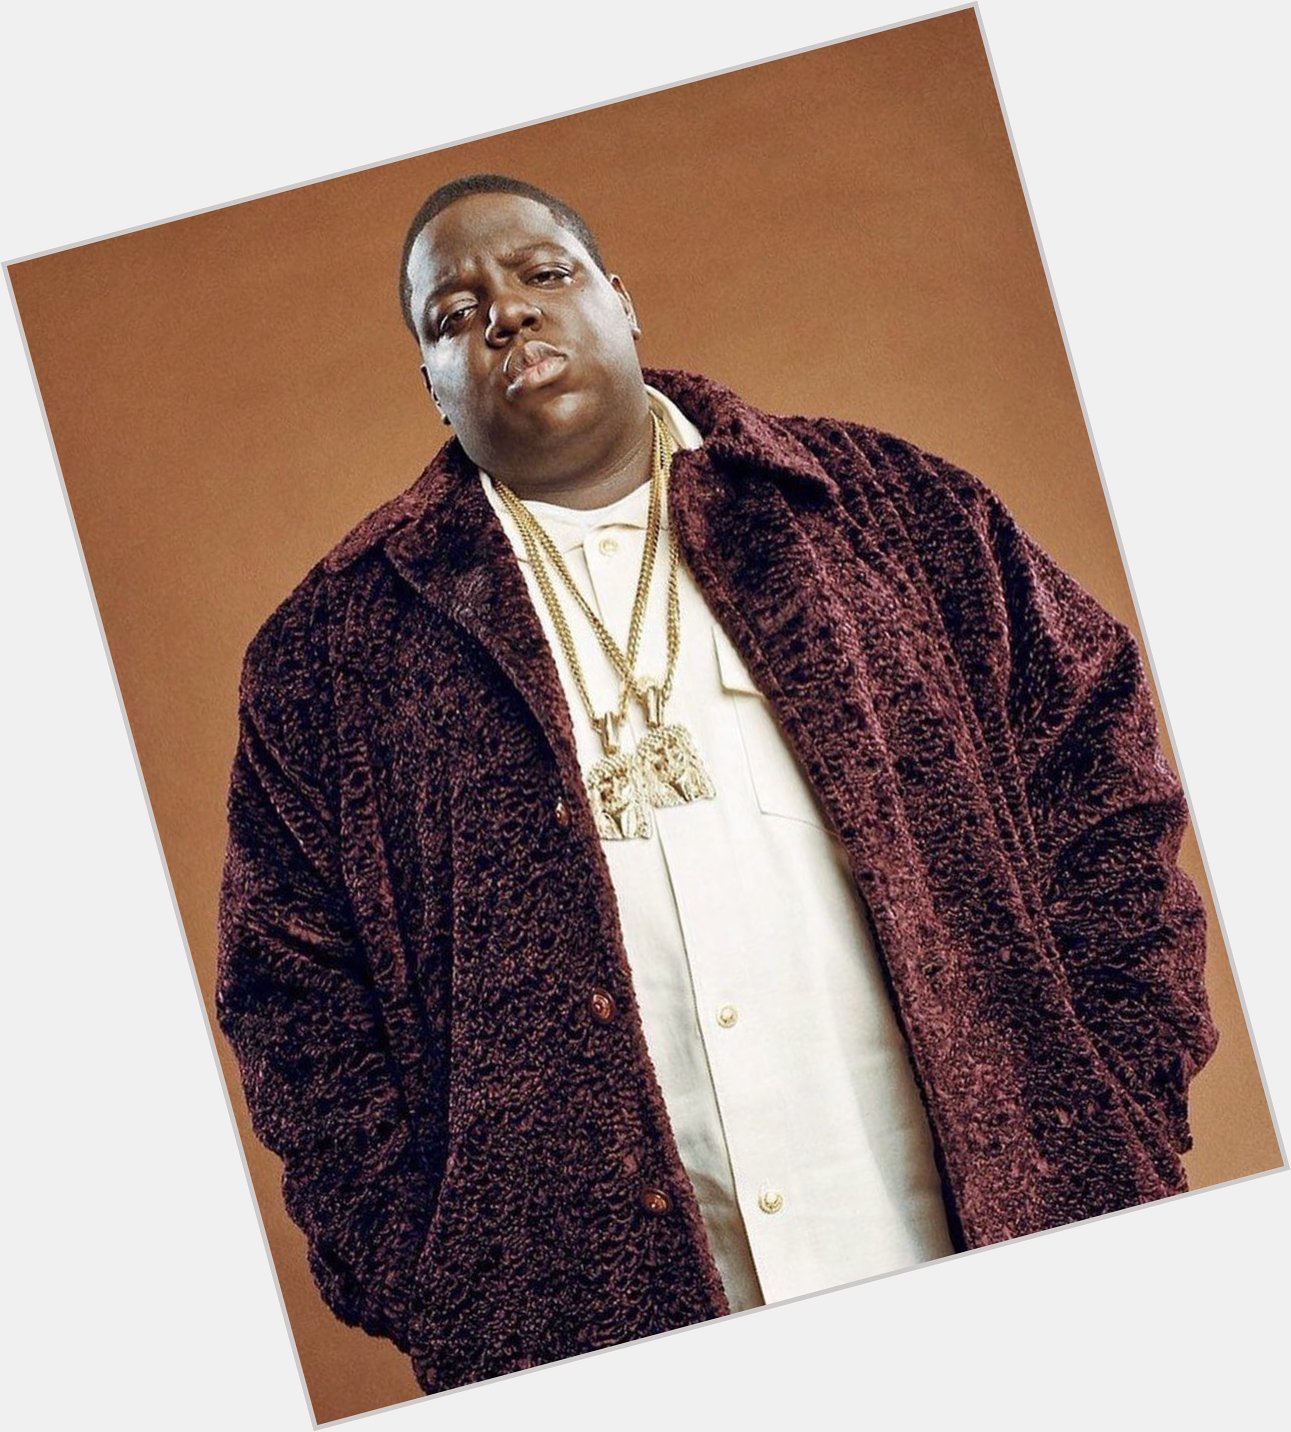 Happy birthday to The Notorious B.I.G. AKA Biggie. He would ve turned 50 today.  